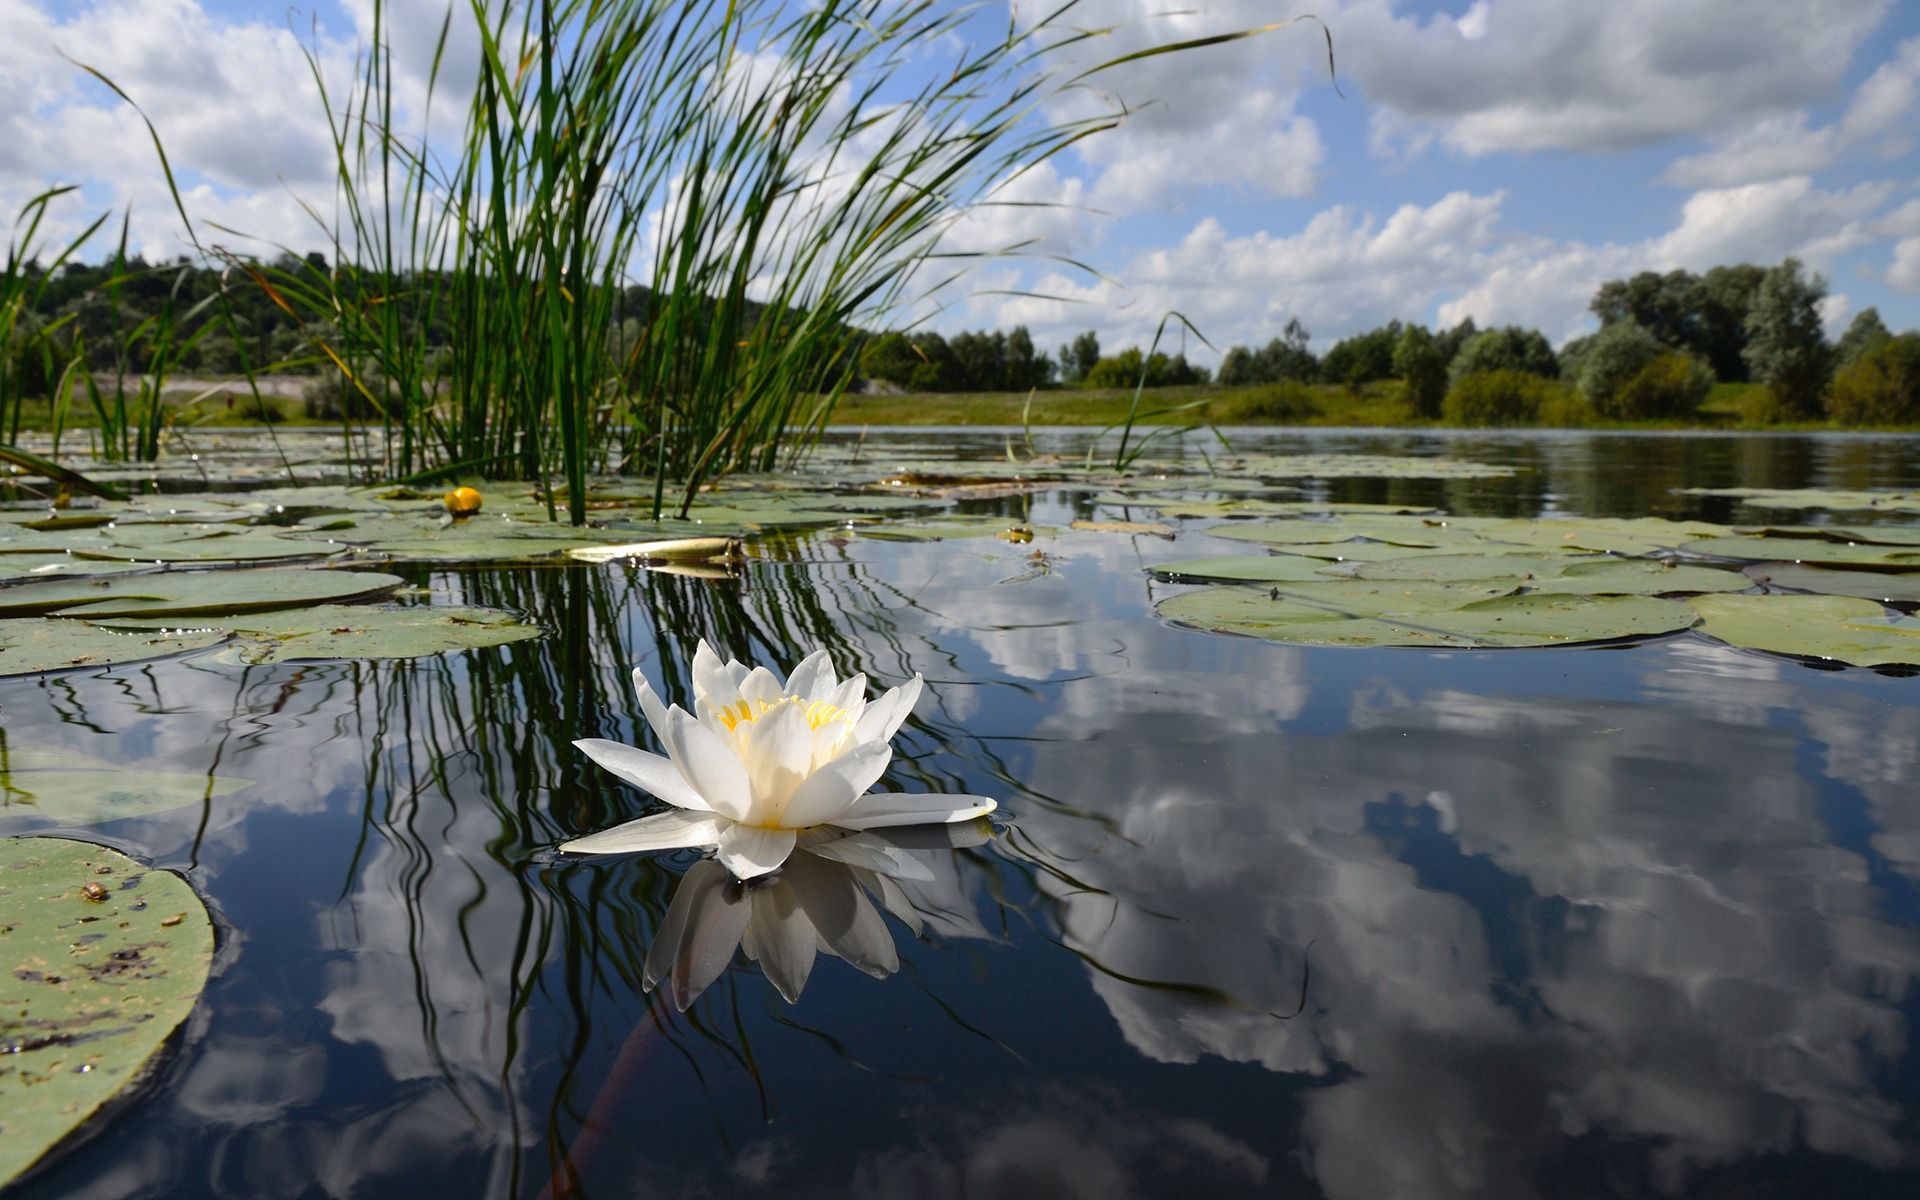 android lake, reflection, flower, water lily, nature, clouds, lily, mirror